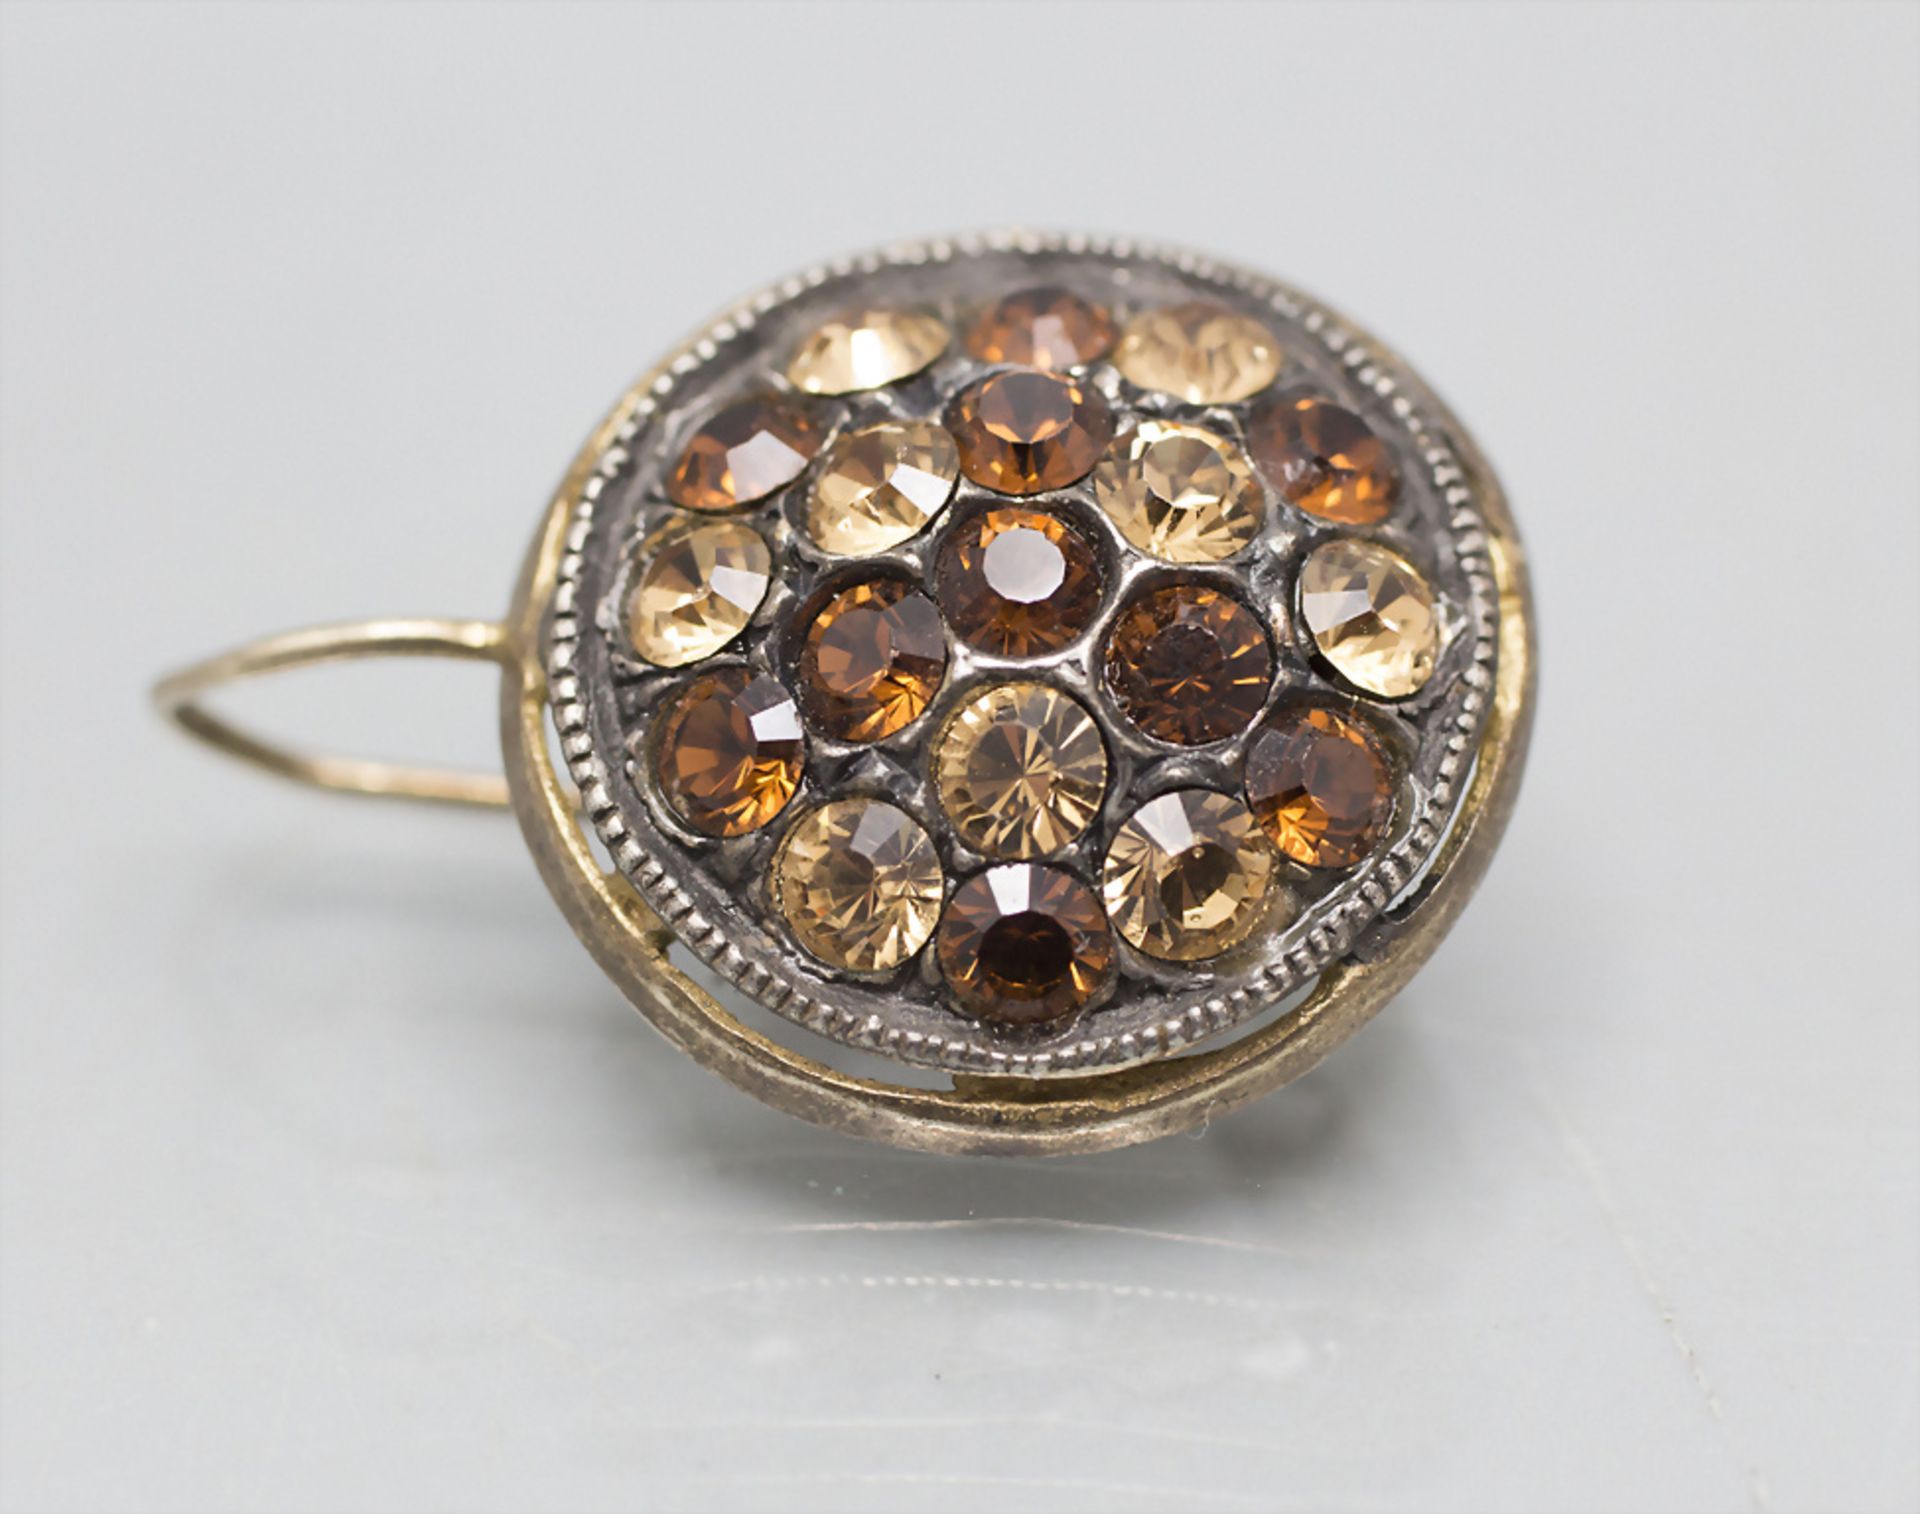 Paar Vintage Silber Ohrhänger mit Steinbesatz / A pair of silver earrings with amber colored stones - Image 2 of 3